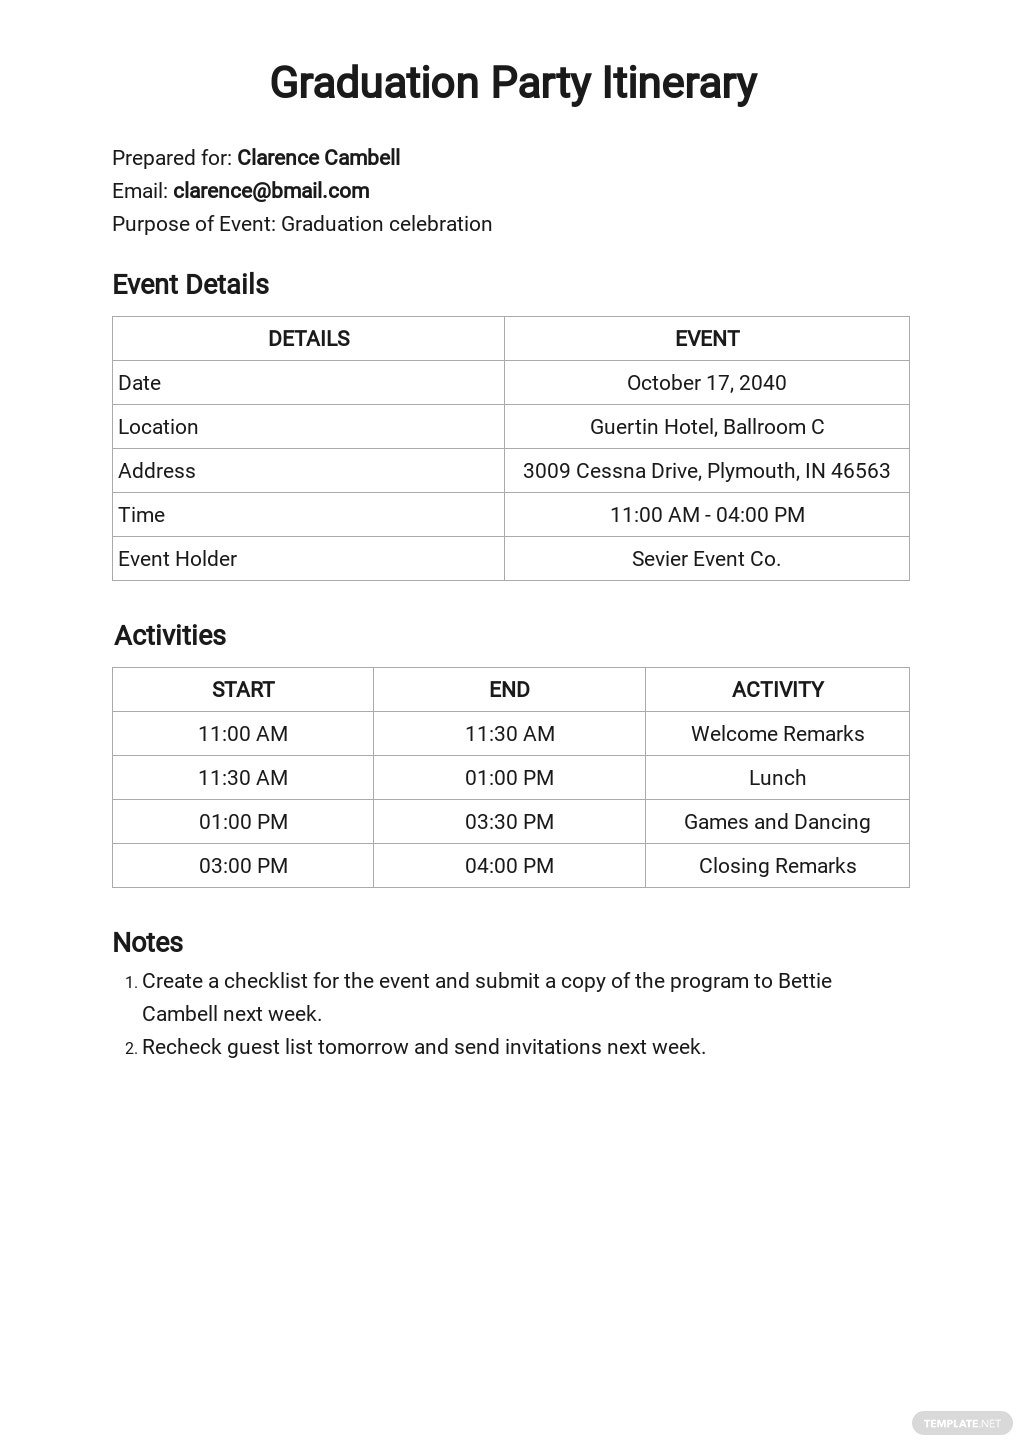 free-graduation-party-itinerary-template